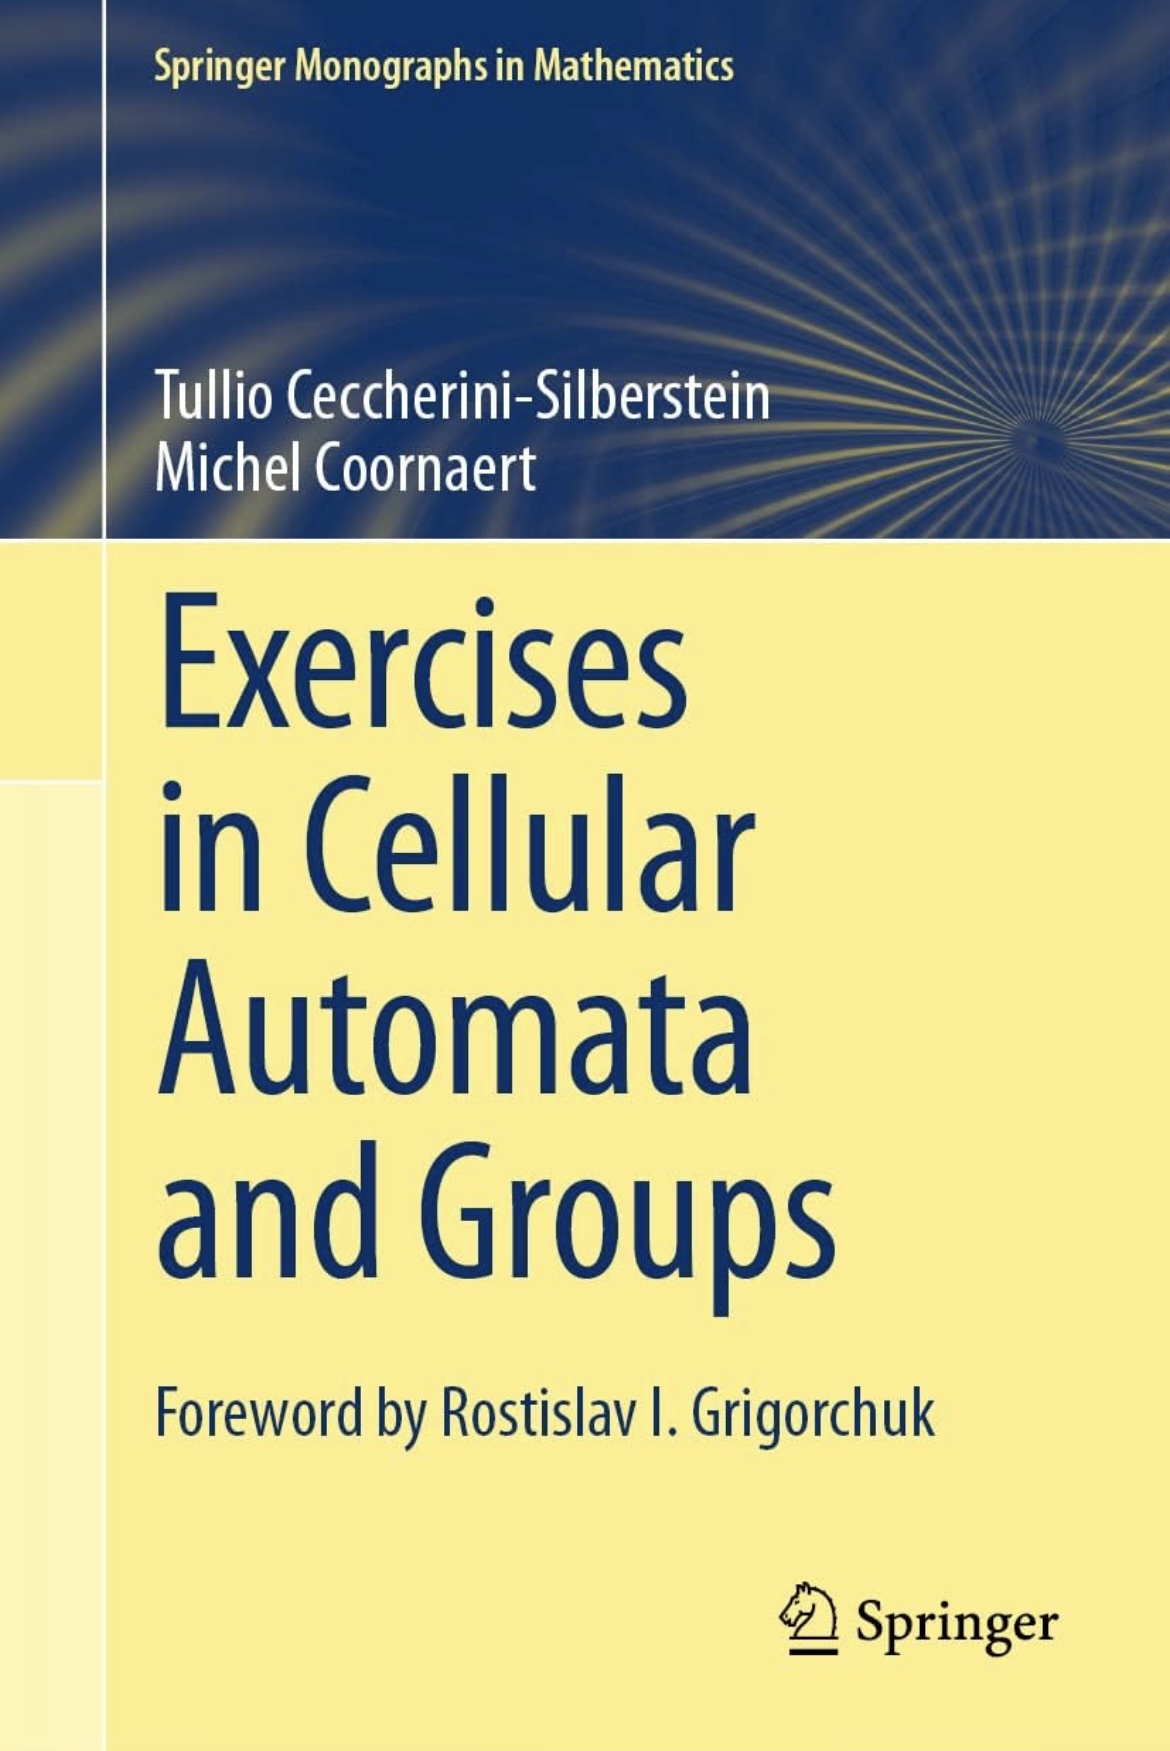 Photo du livre  Exercises in cellular automata and groups